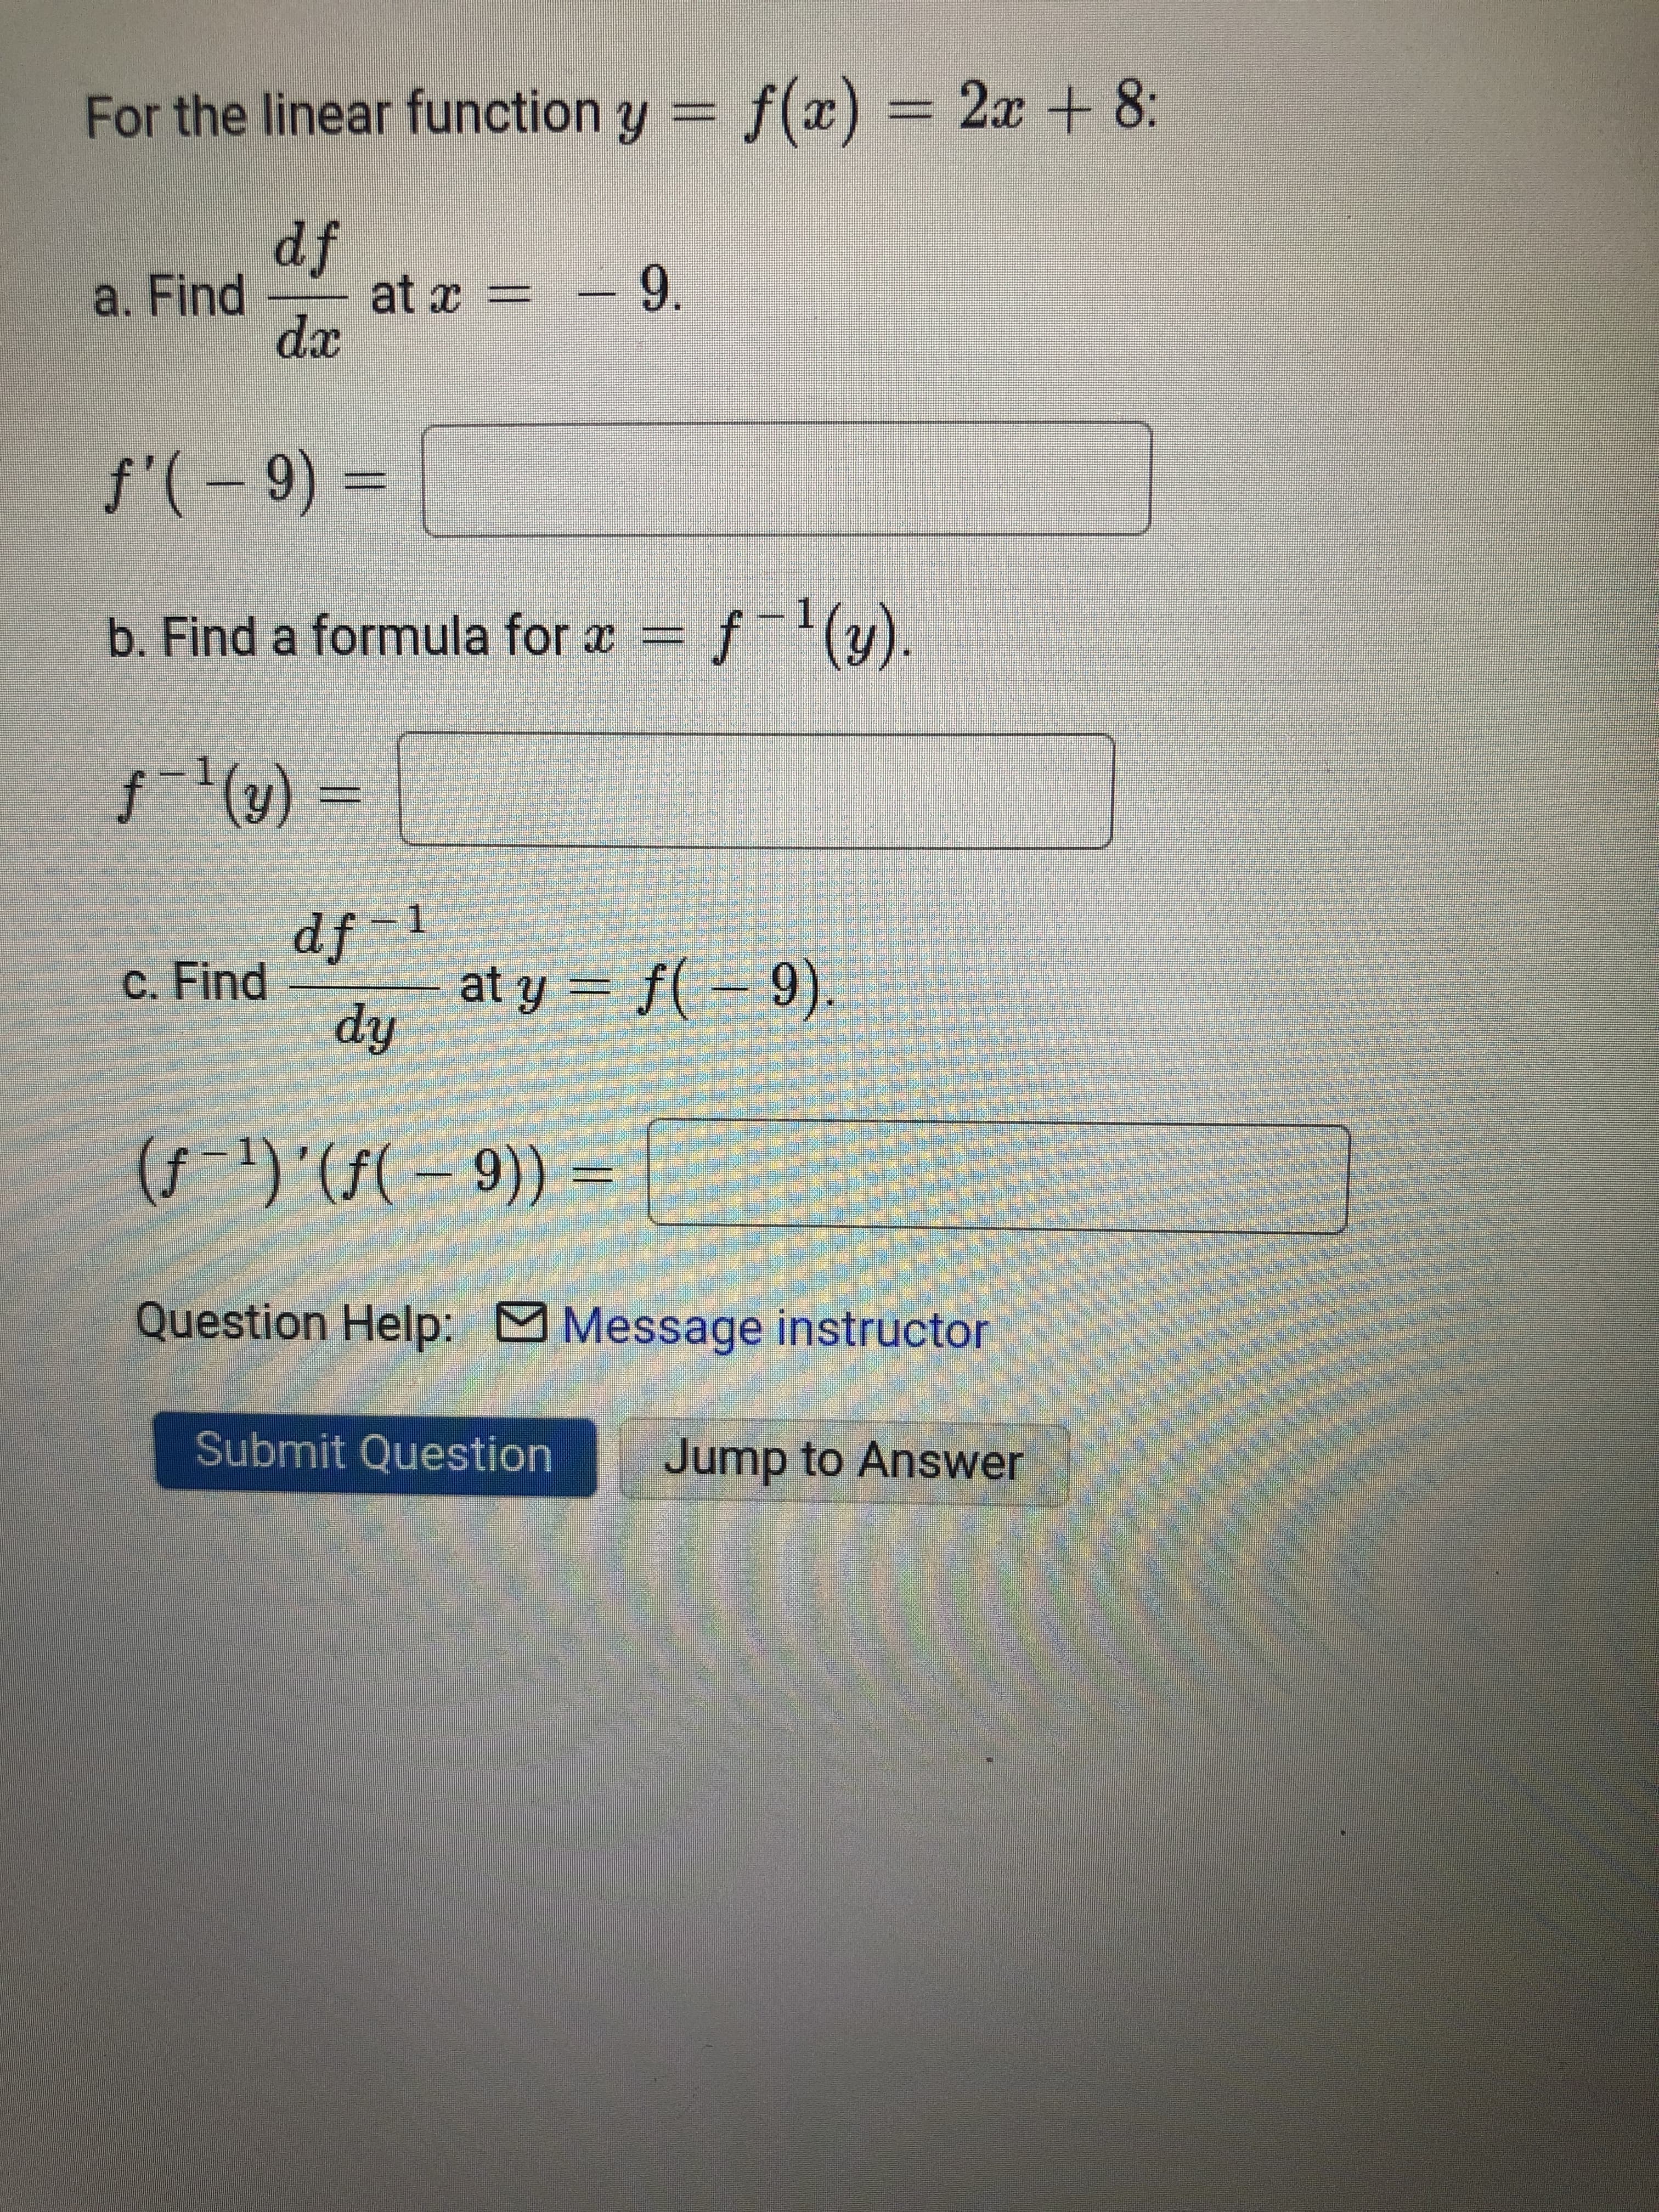 For the linear function y = f(x) = 2x + 8:
a. Find
fp
6- = x
9.
xp
b. Find a formula for x = f(y).
().
= (k), - f
- fp
at y
c. Find
hp
= ((6-).(- )
Question Help: Message instructor
Submit Question
Jump to Answer
